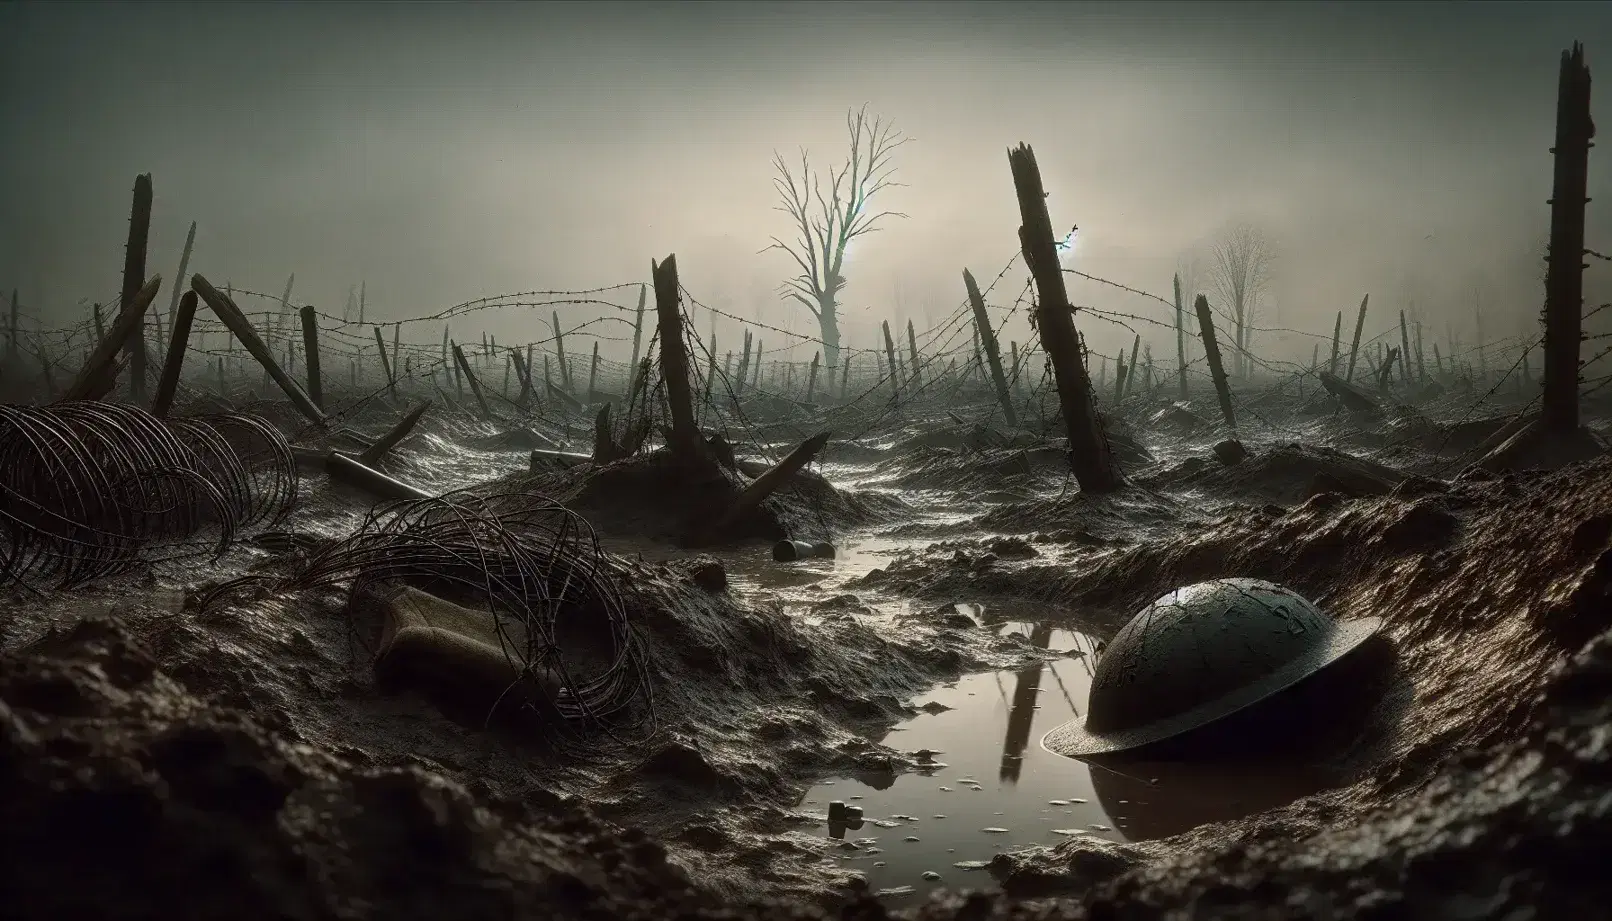 Somber WWI battlefield with muddy shell craters, barbed wire, shattered trees, and a lone soldier walking towards eroded trenches under a gray sky.